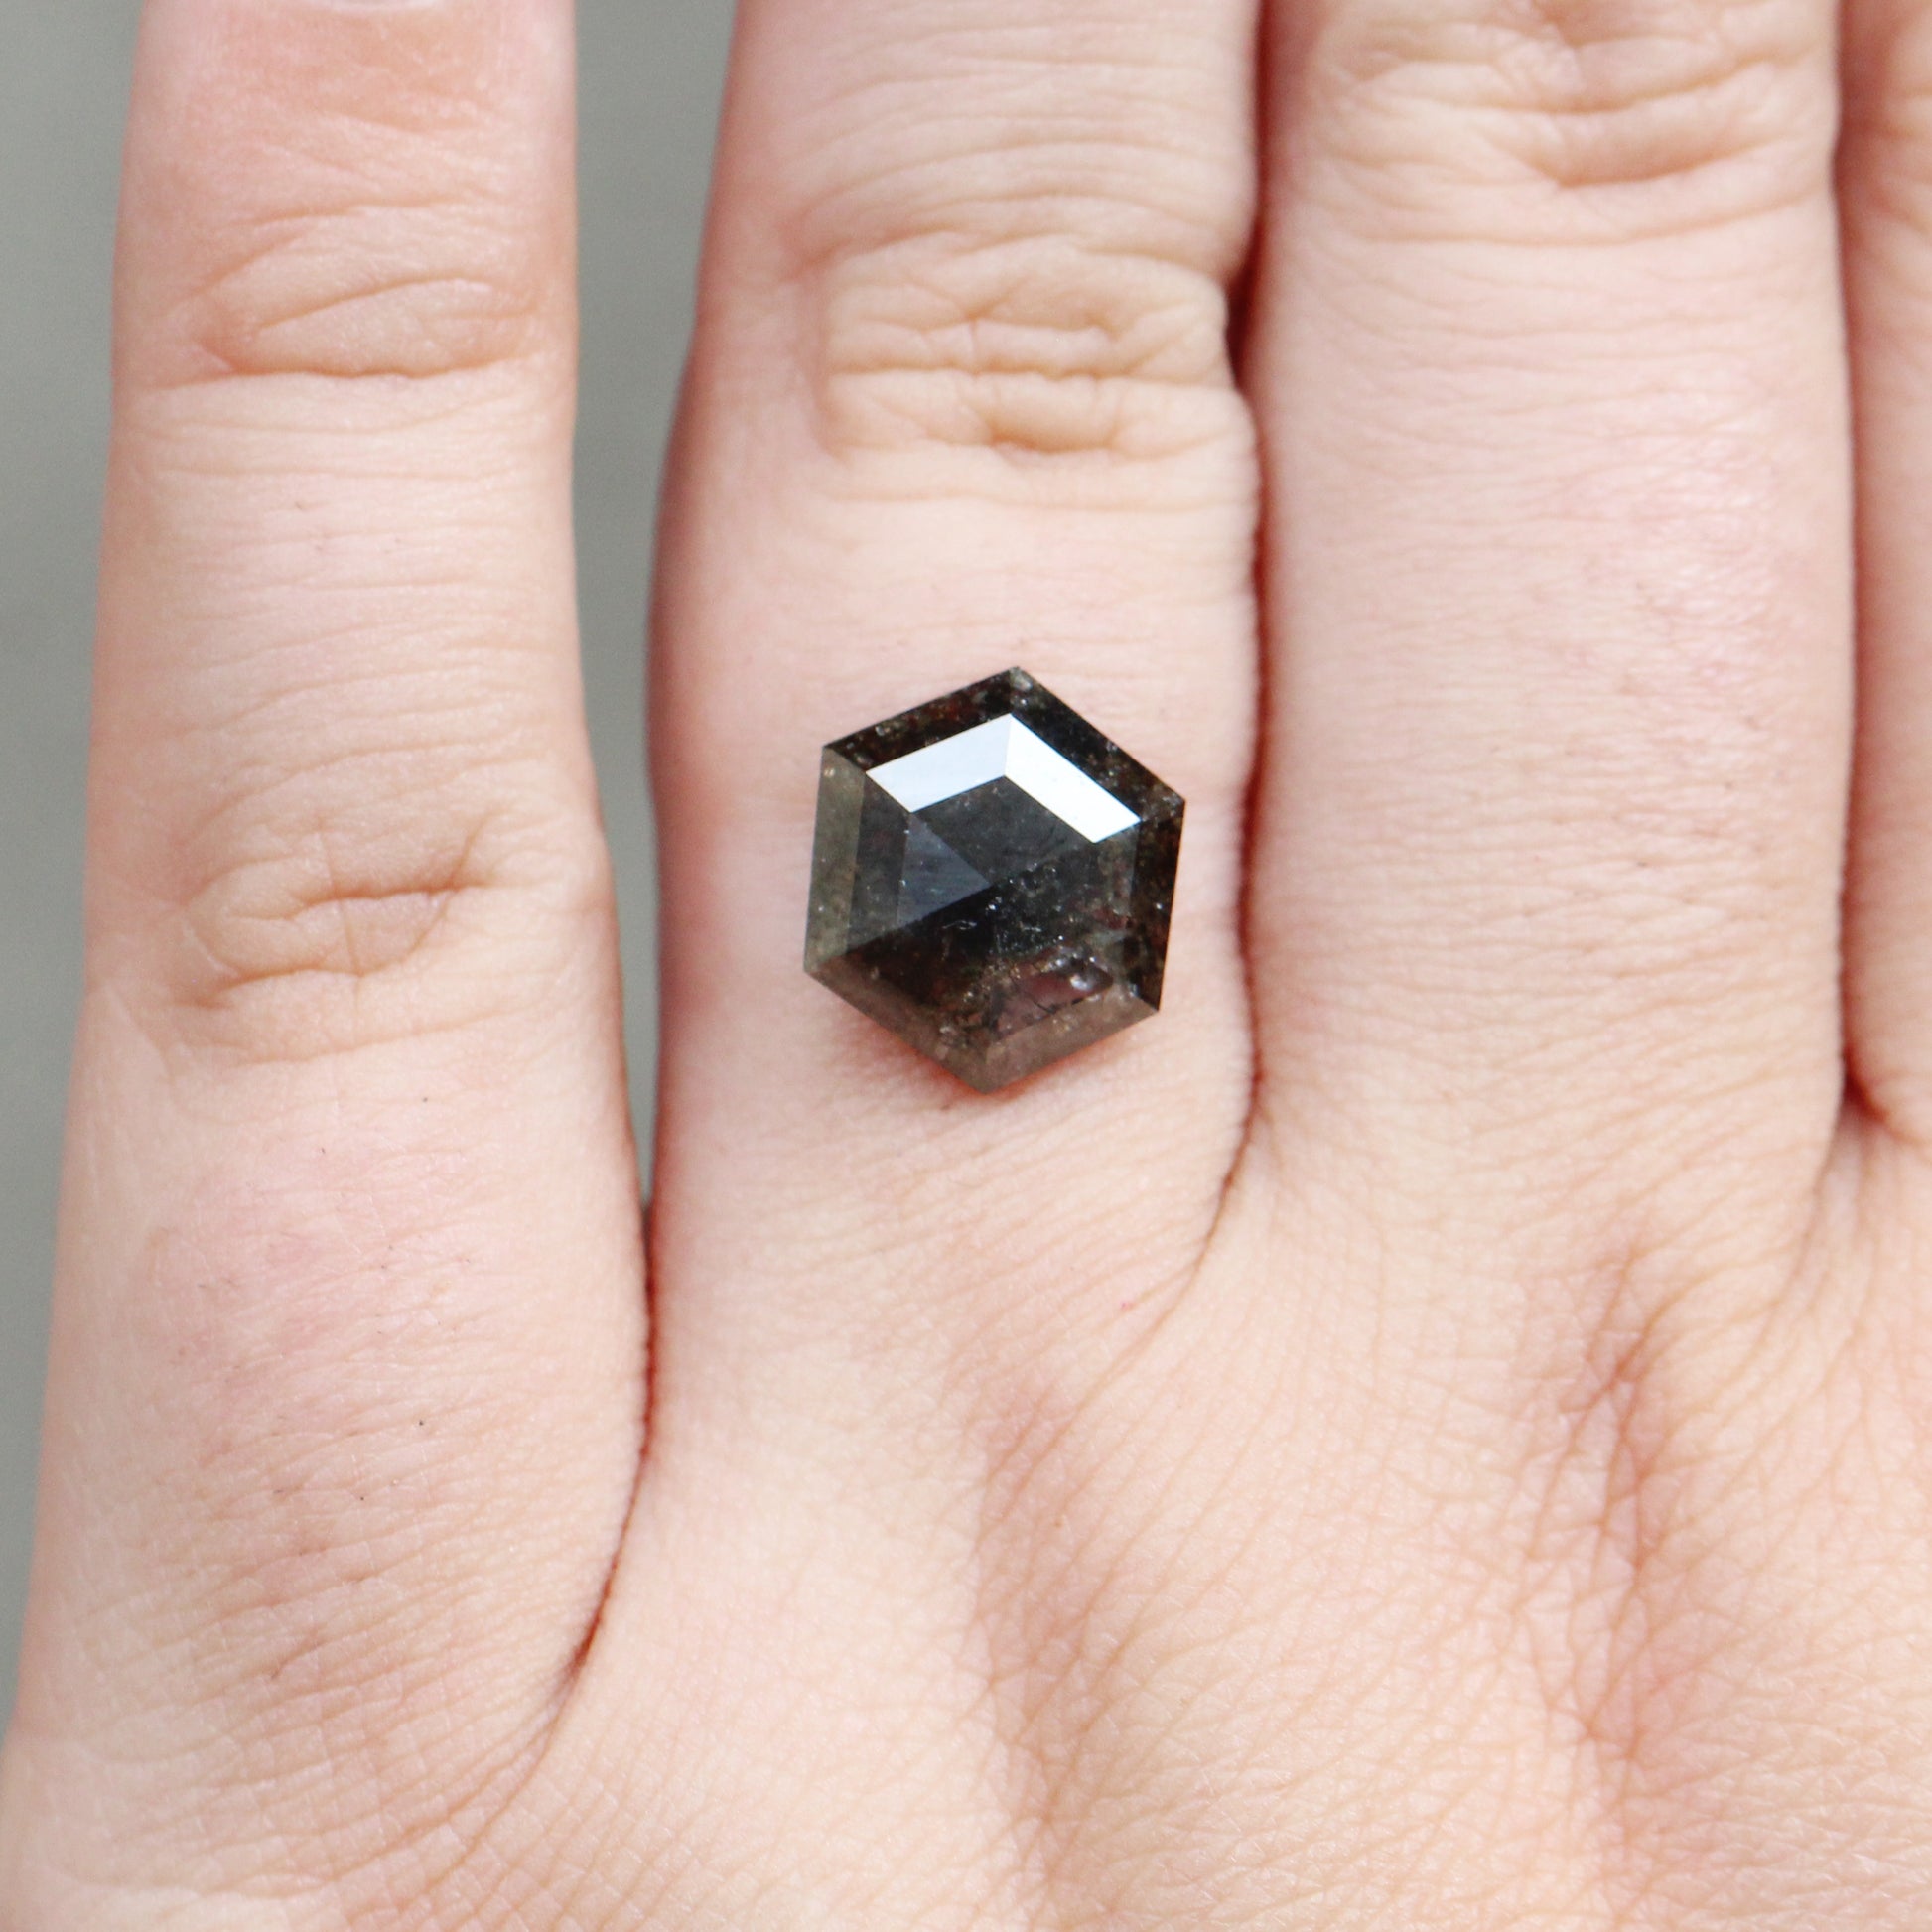 4.25 Carat Natural Black Hexagon Diamond for Custom Work - Inventory Code NBHD425 - Midwinter Co. Alternative Bridal Rings and Modern Fine Jewelry